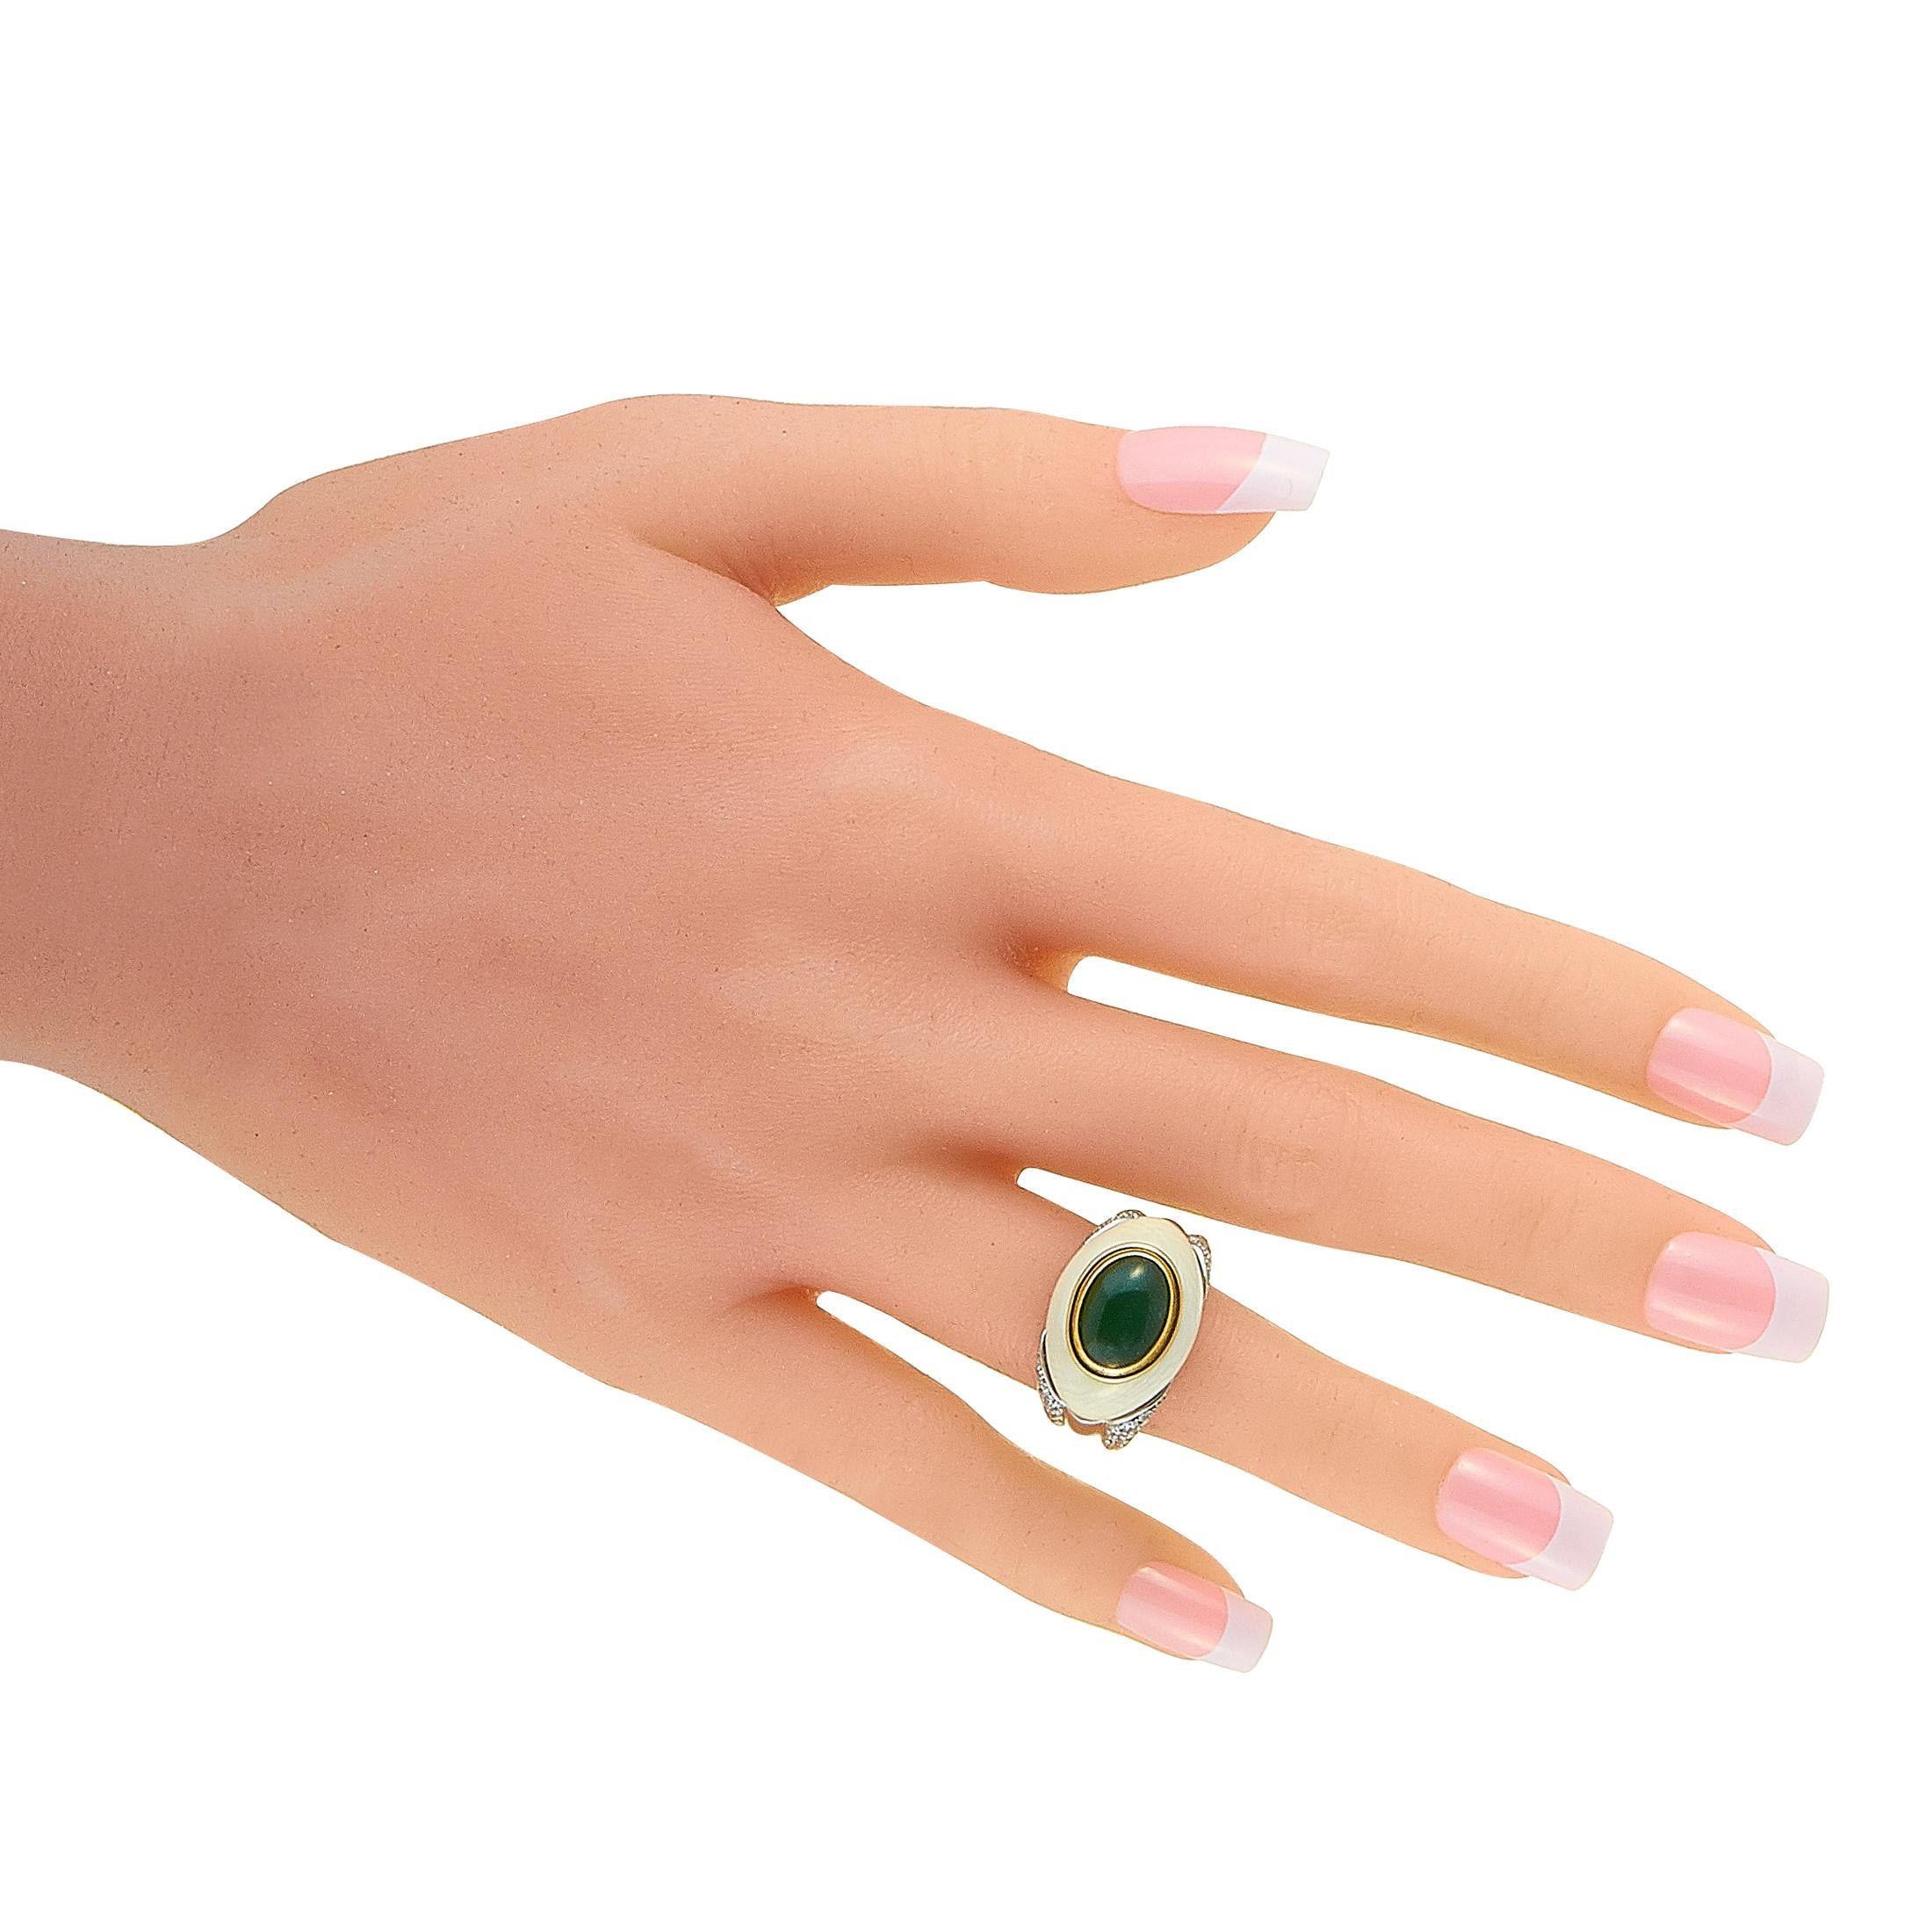 Women's LB Exclusive Platinum Diamond, White Coral and Jade Ring